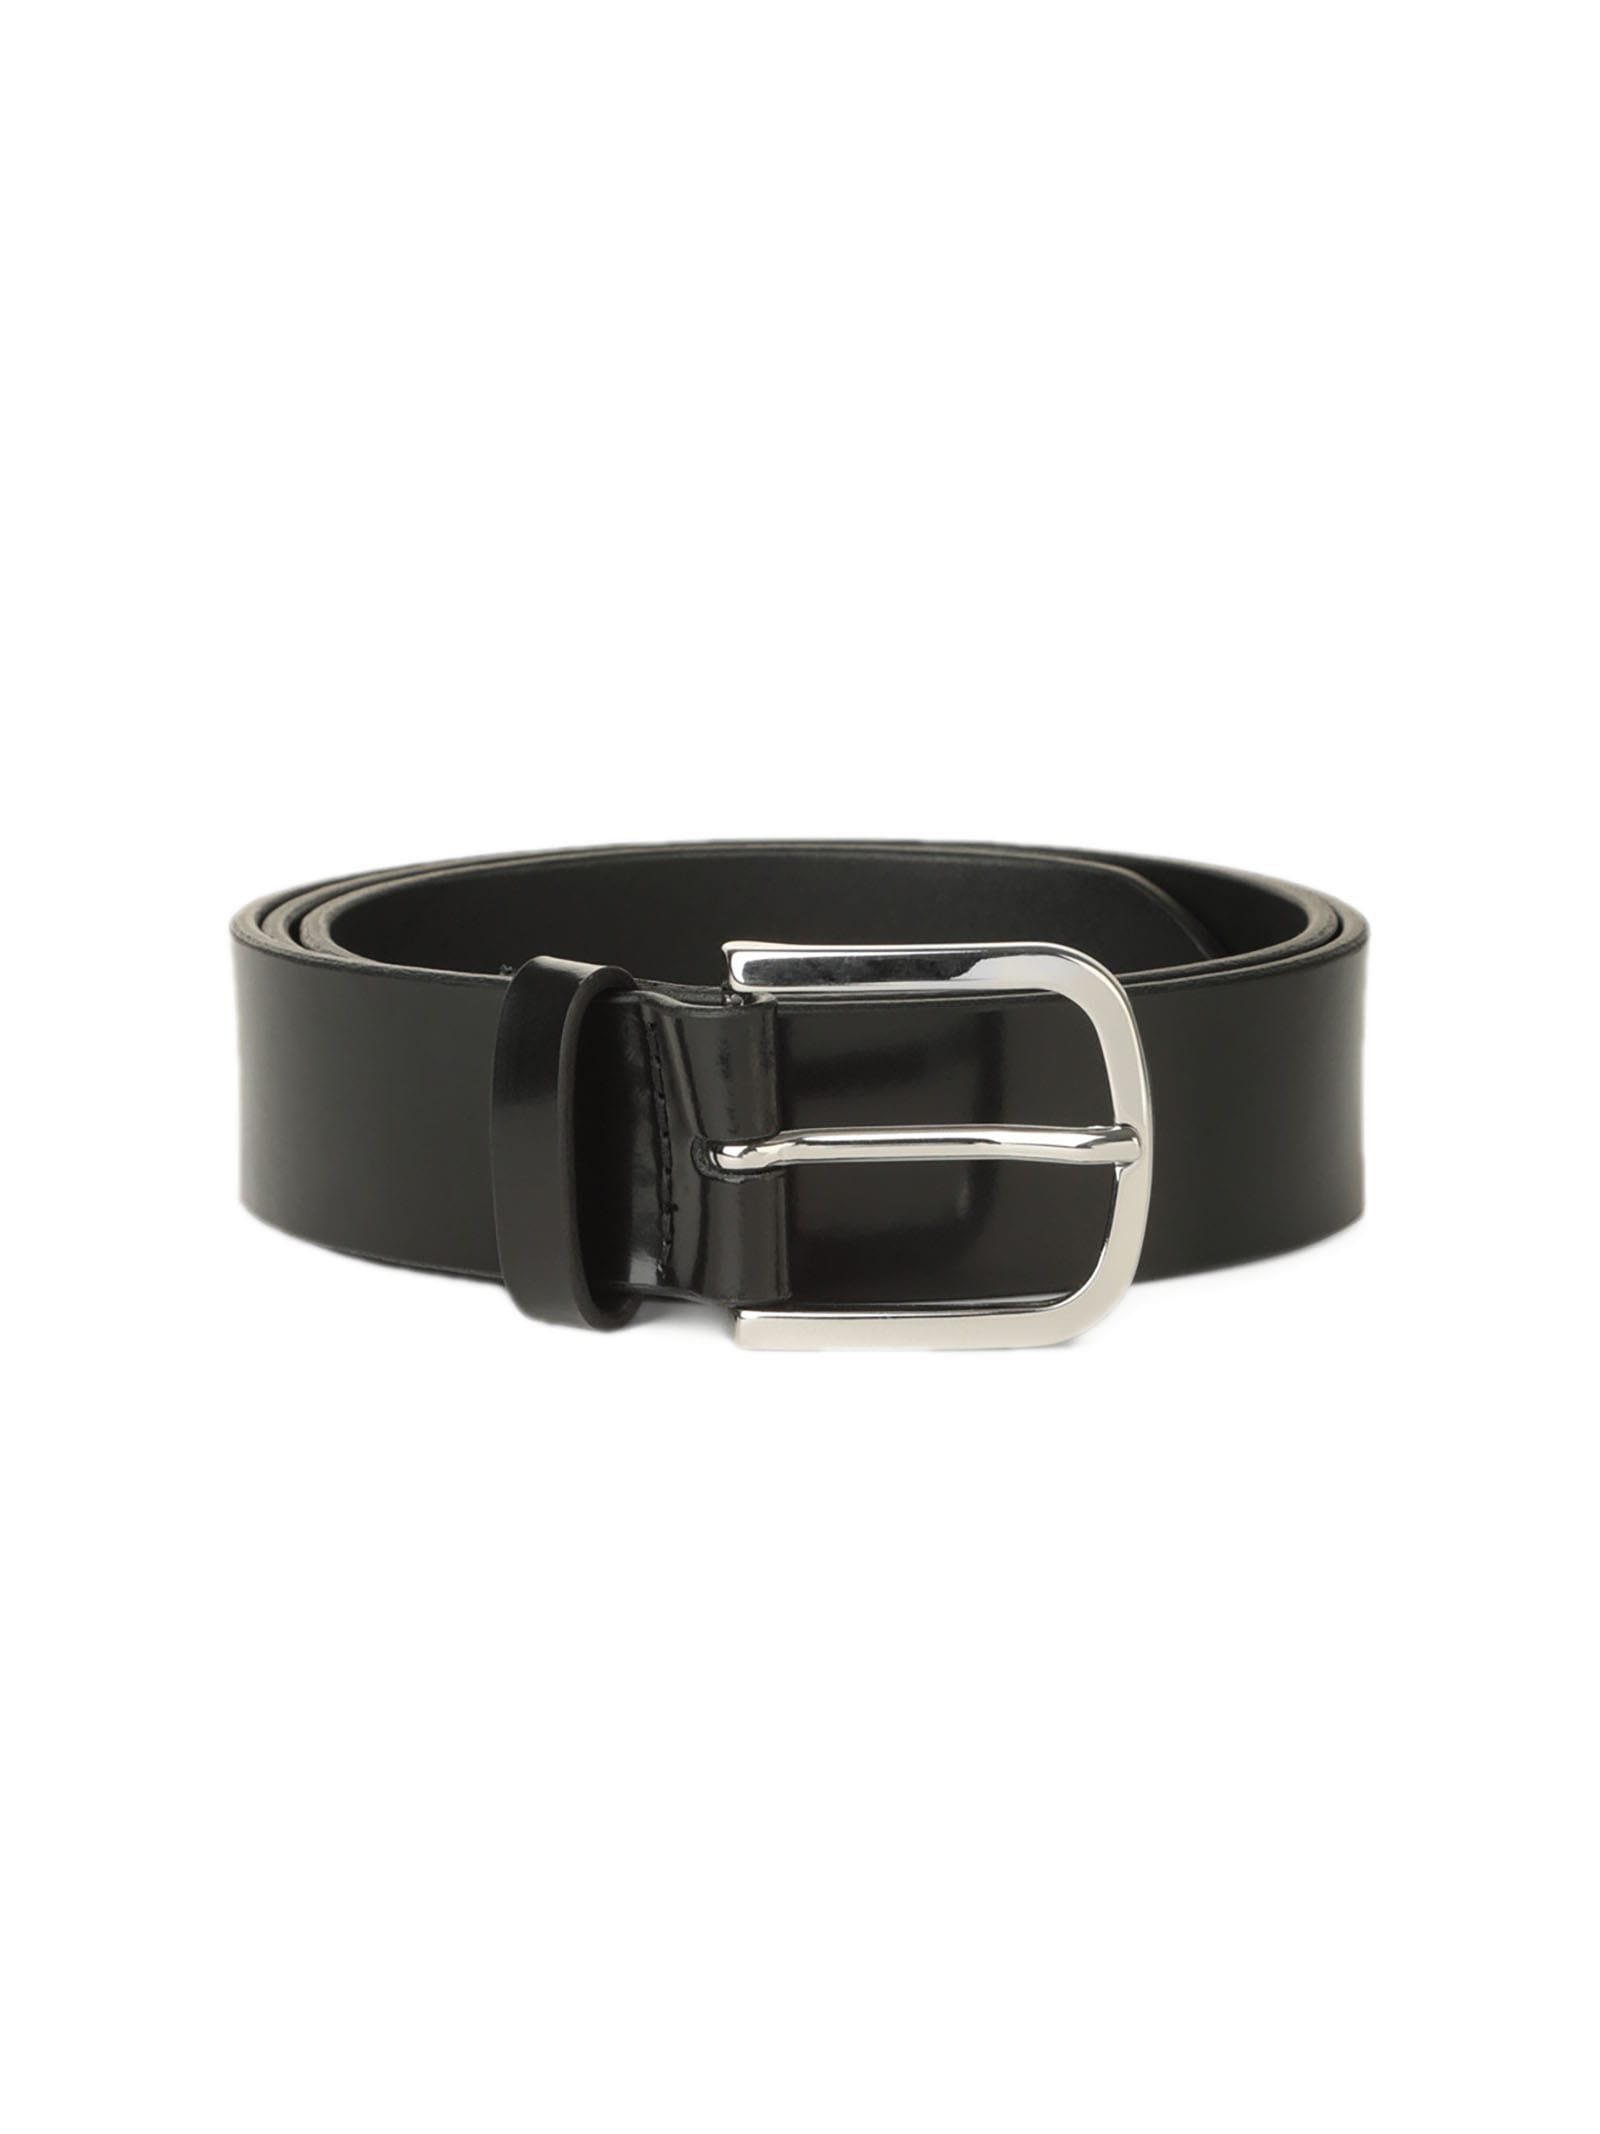 Orciani Bright Classic Patent Leather Belt